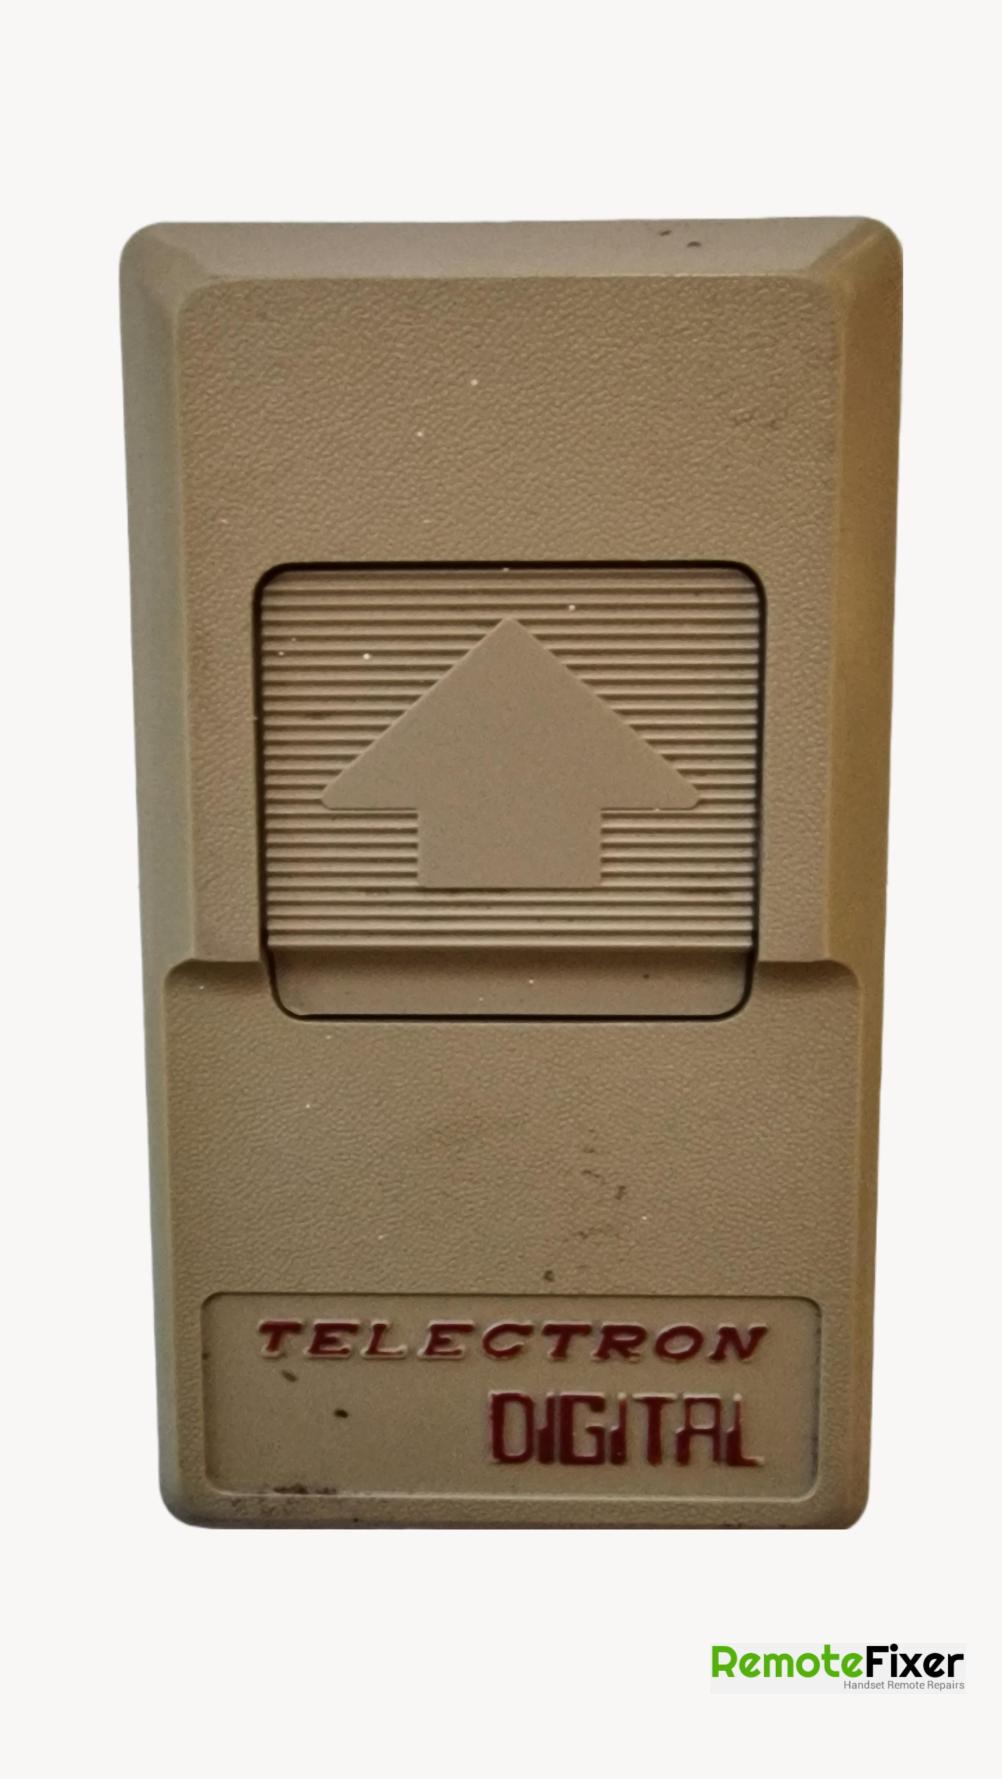 Telectron Digital T80 RF230 Remote Control - Front Image